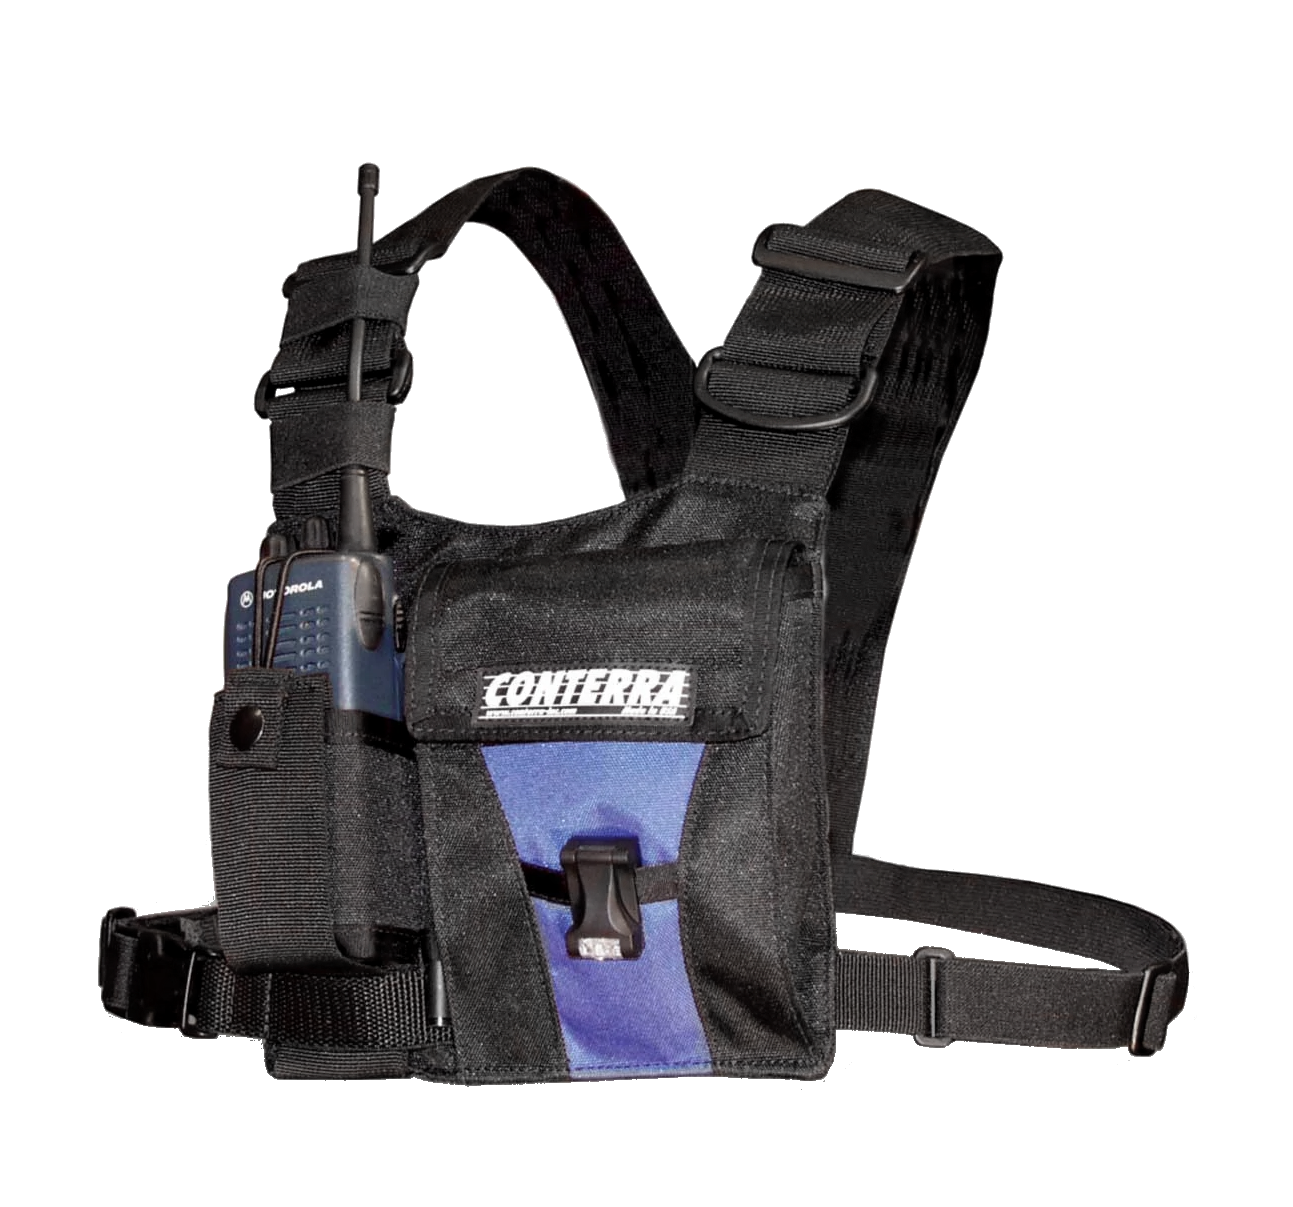 Conterra Adjusta Pro II Radio Chest Harness, with a light attached.